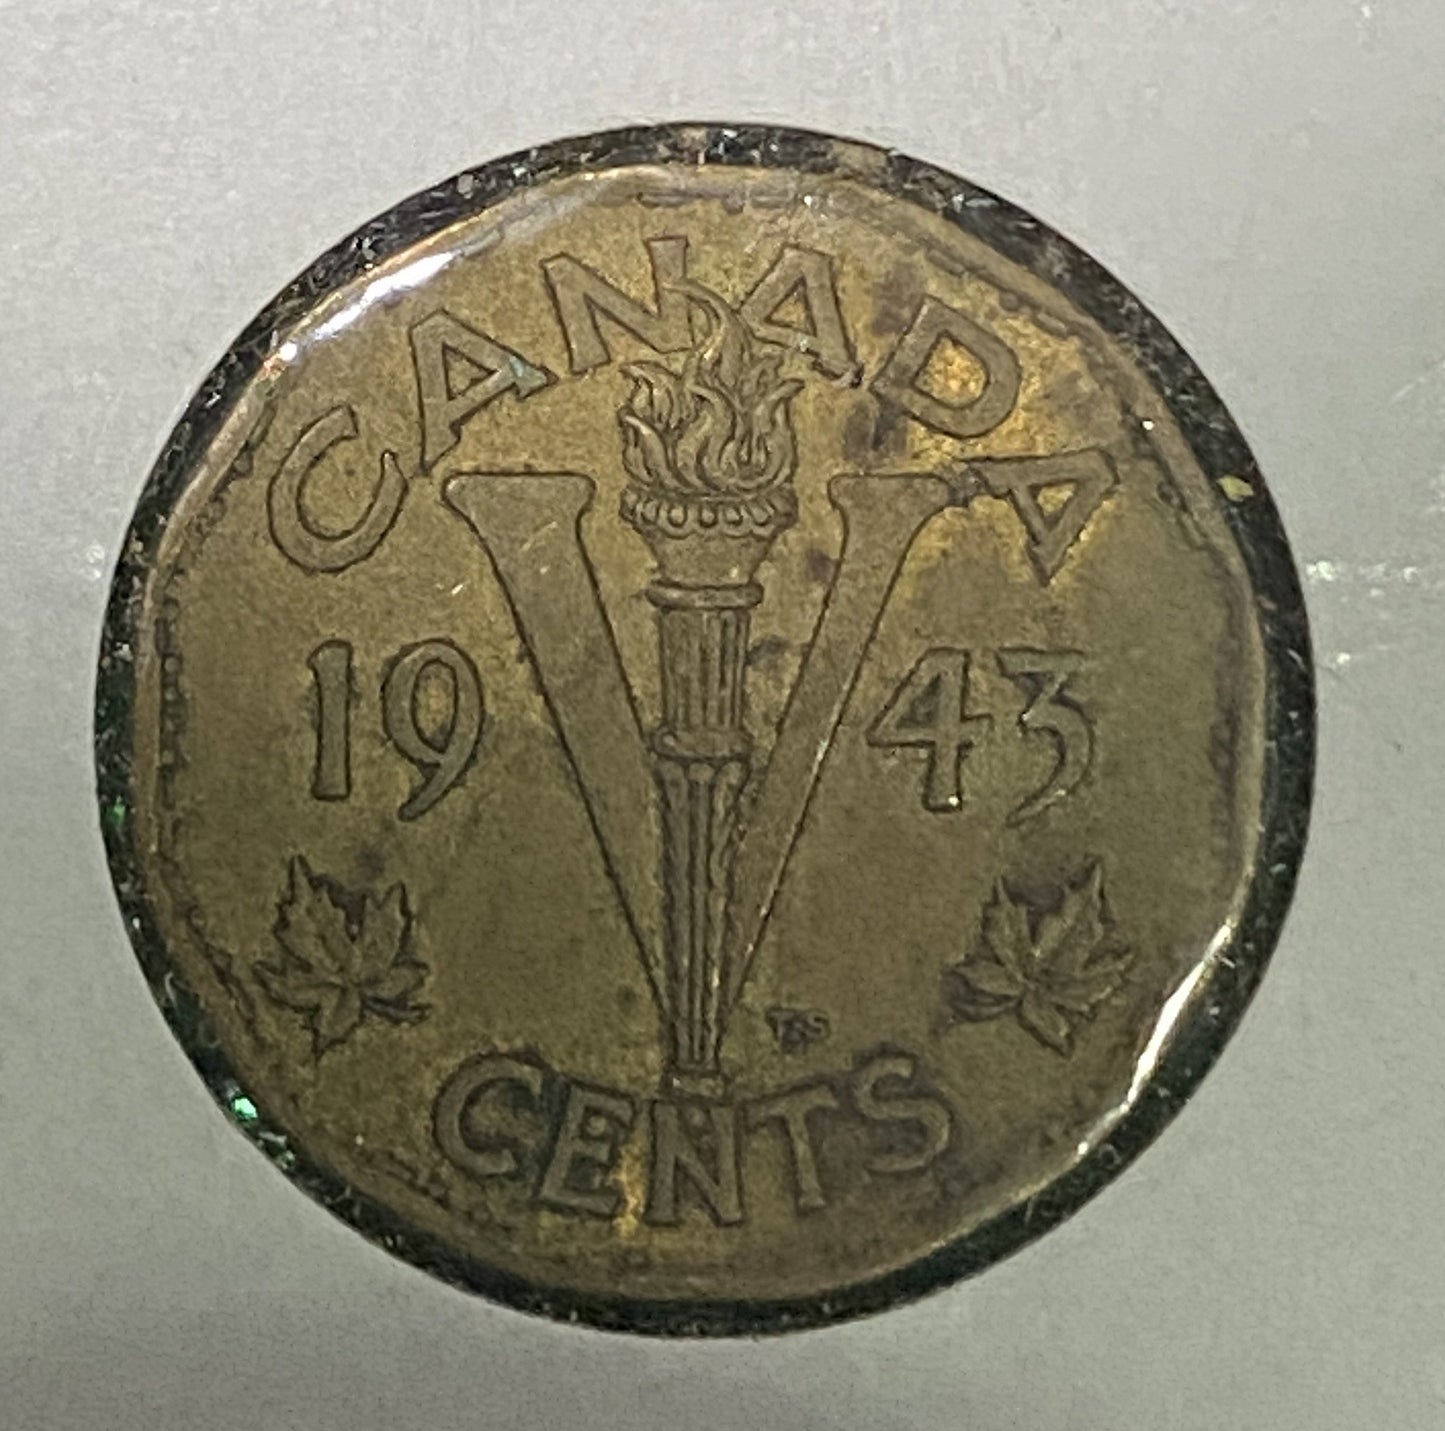 CANADIAN 1943 WAR VICTORY TOMBAC NICKEL 5 CENTS COIN GEORGE VI (FINE/VG+)